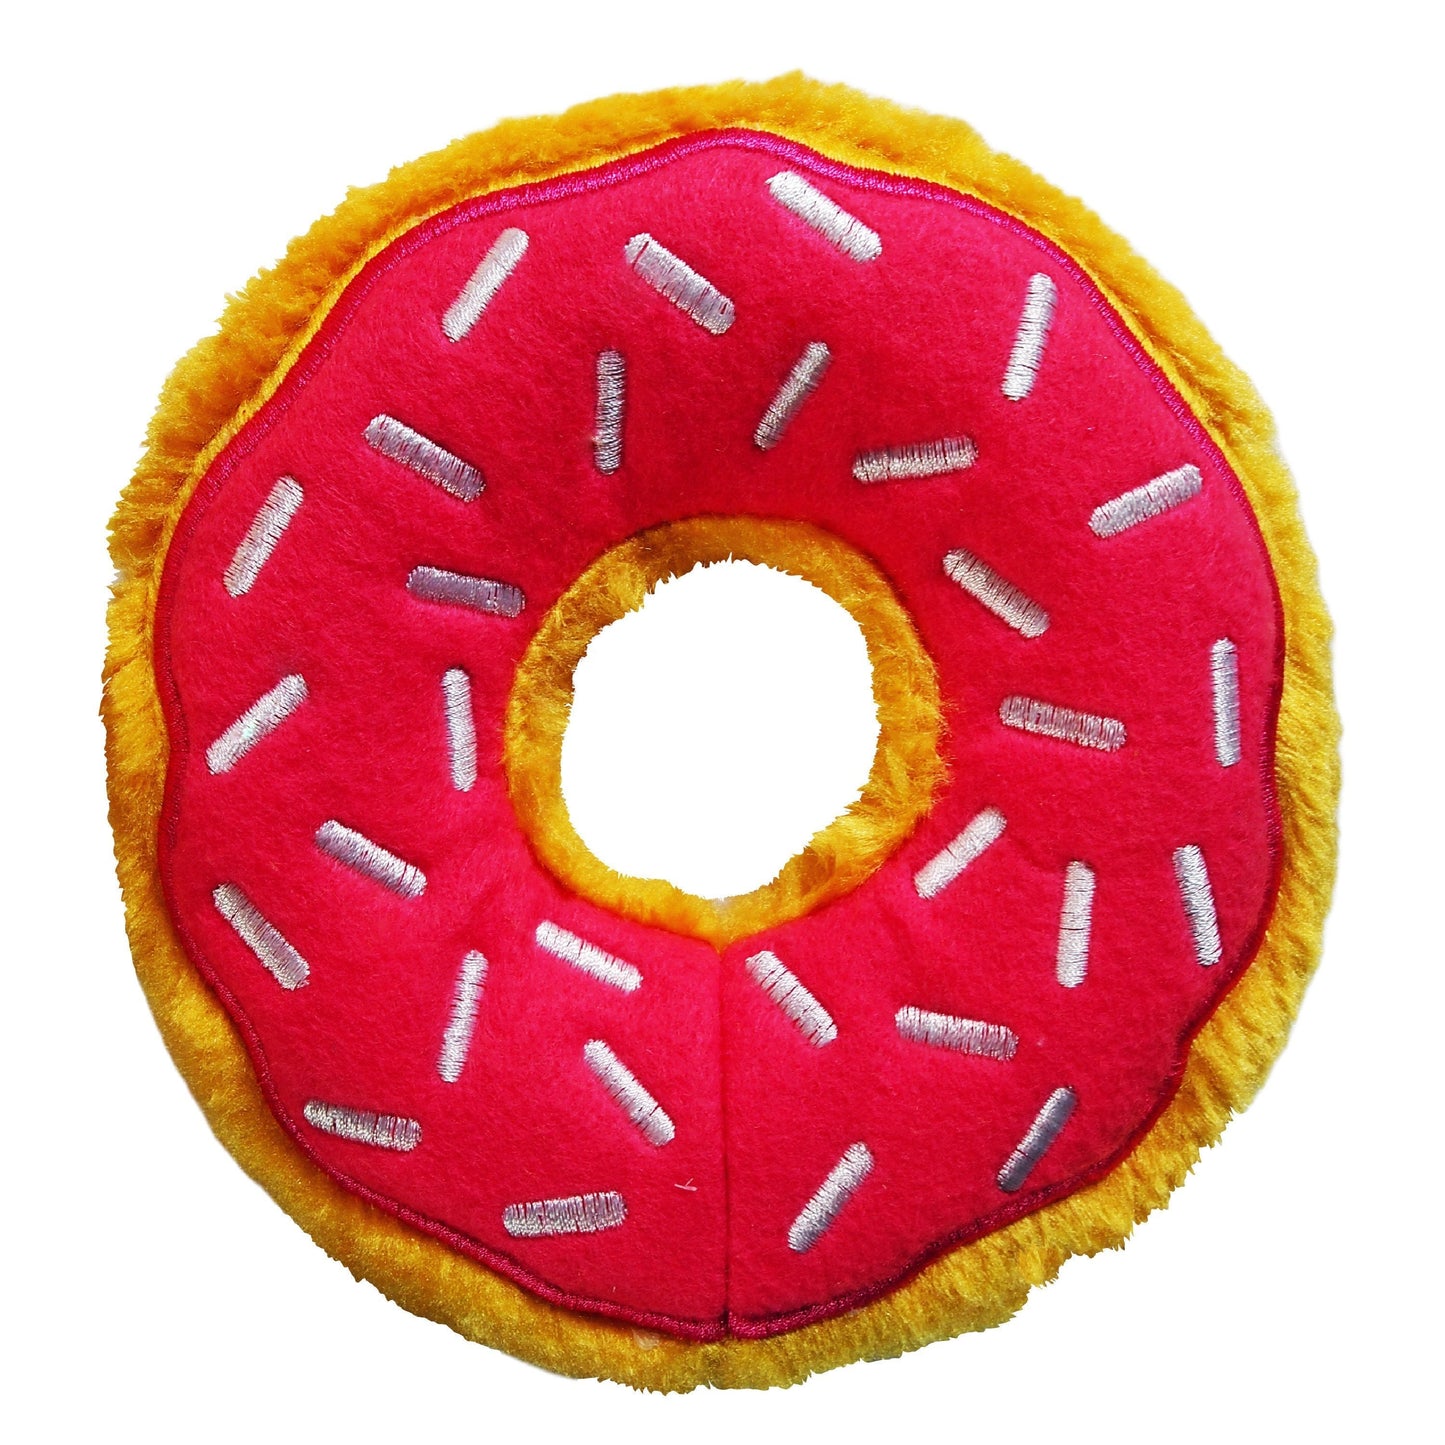 Dog Toy : Donut with Sprinkles Plush Squeaker Toy - Hot Pink - LEAGUE OF CRAFTY CANINES